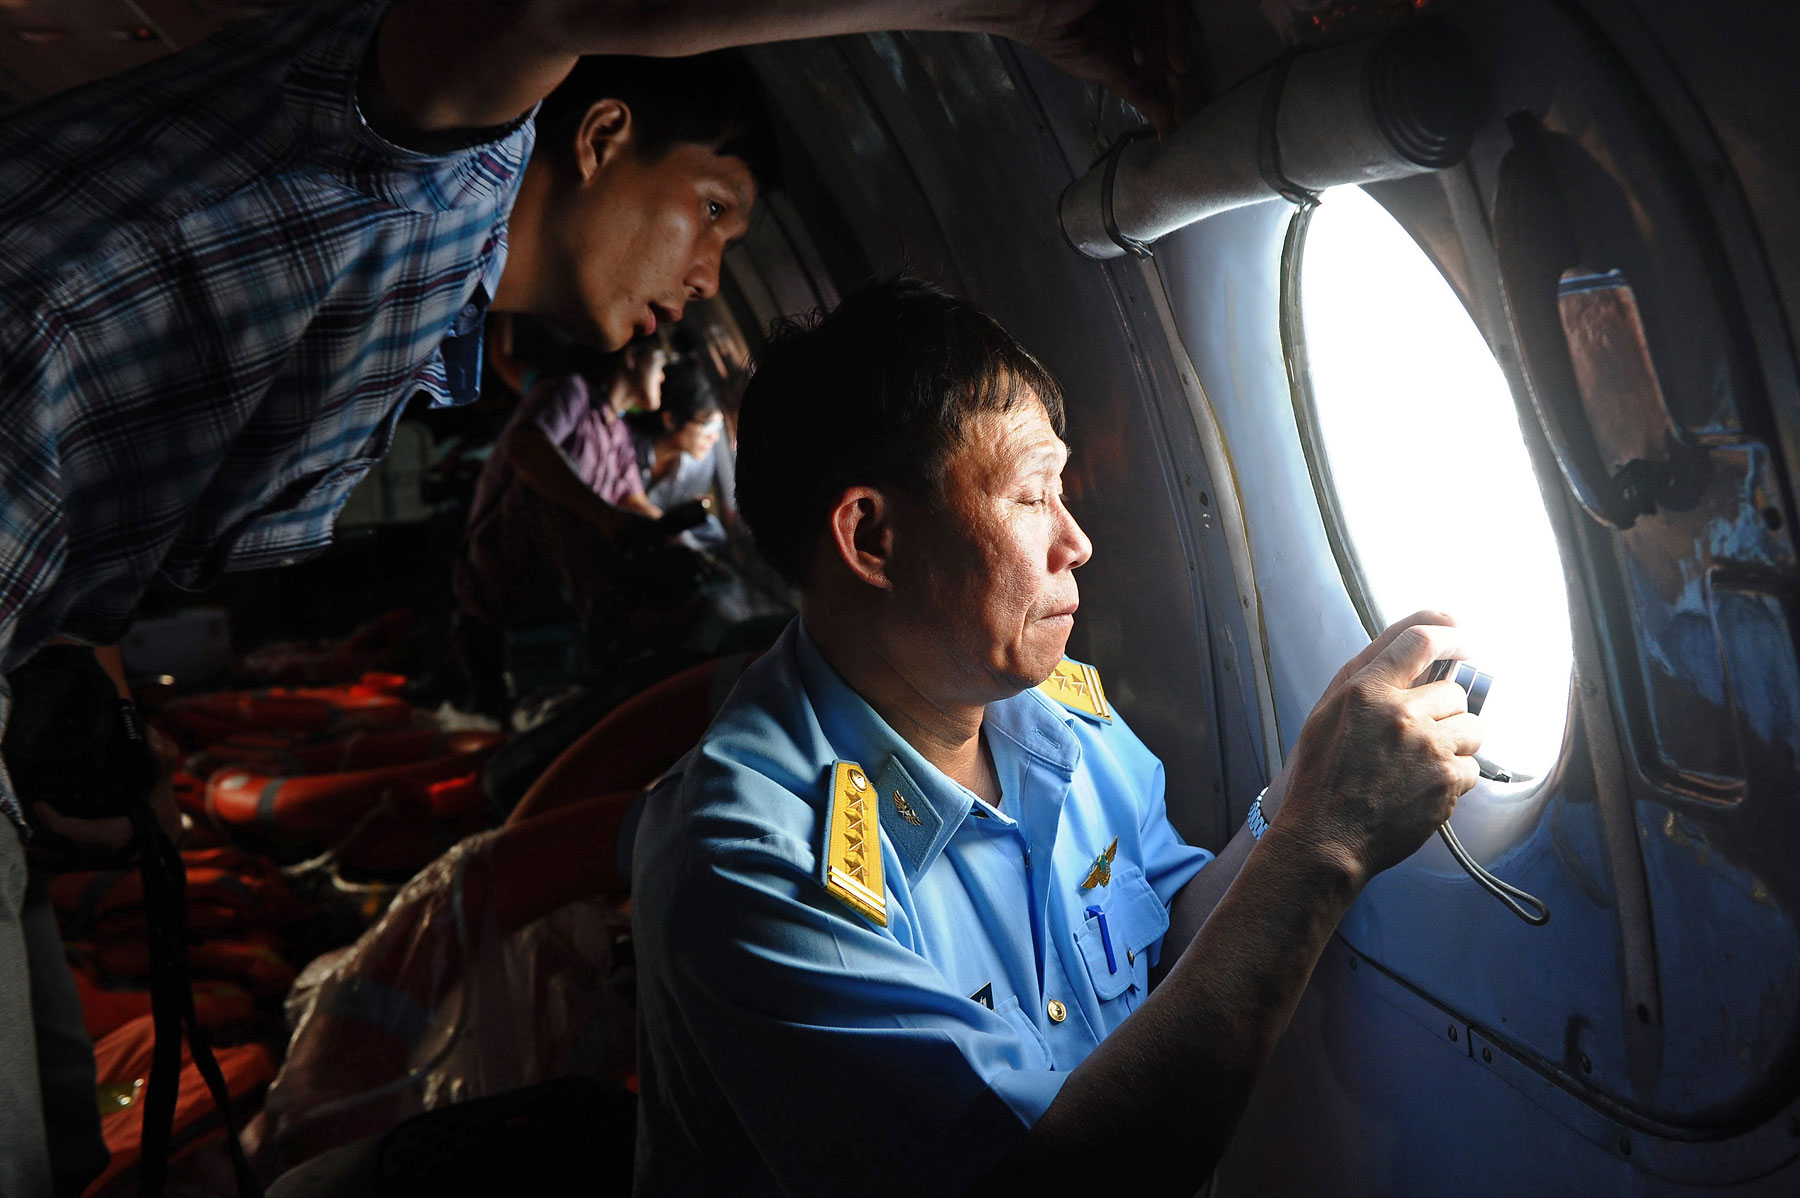 A Vietnamese Air Force officer, right, and a reporter look out the window during search operations over the southern seas off Vietnam on March 9, 2014. (Hoang Dinh Nam&mdash;AFP/Getty Images)